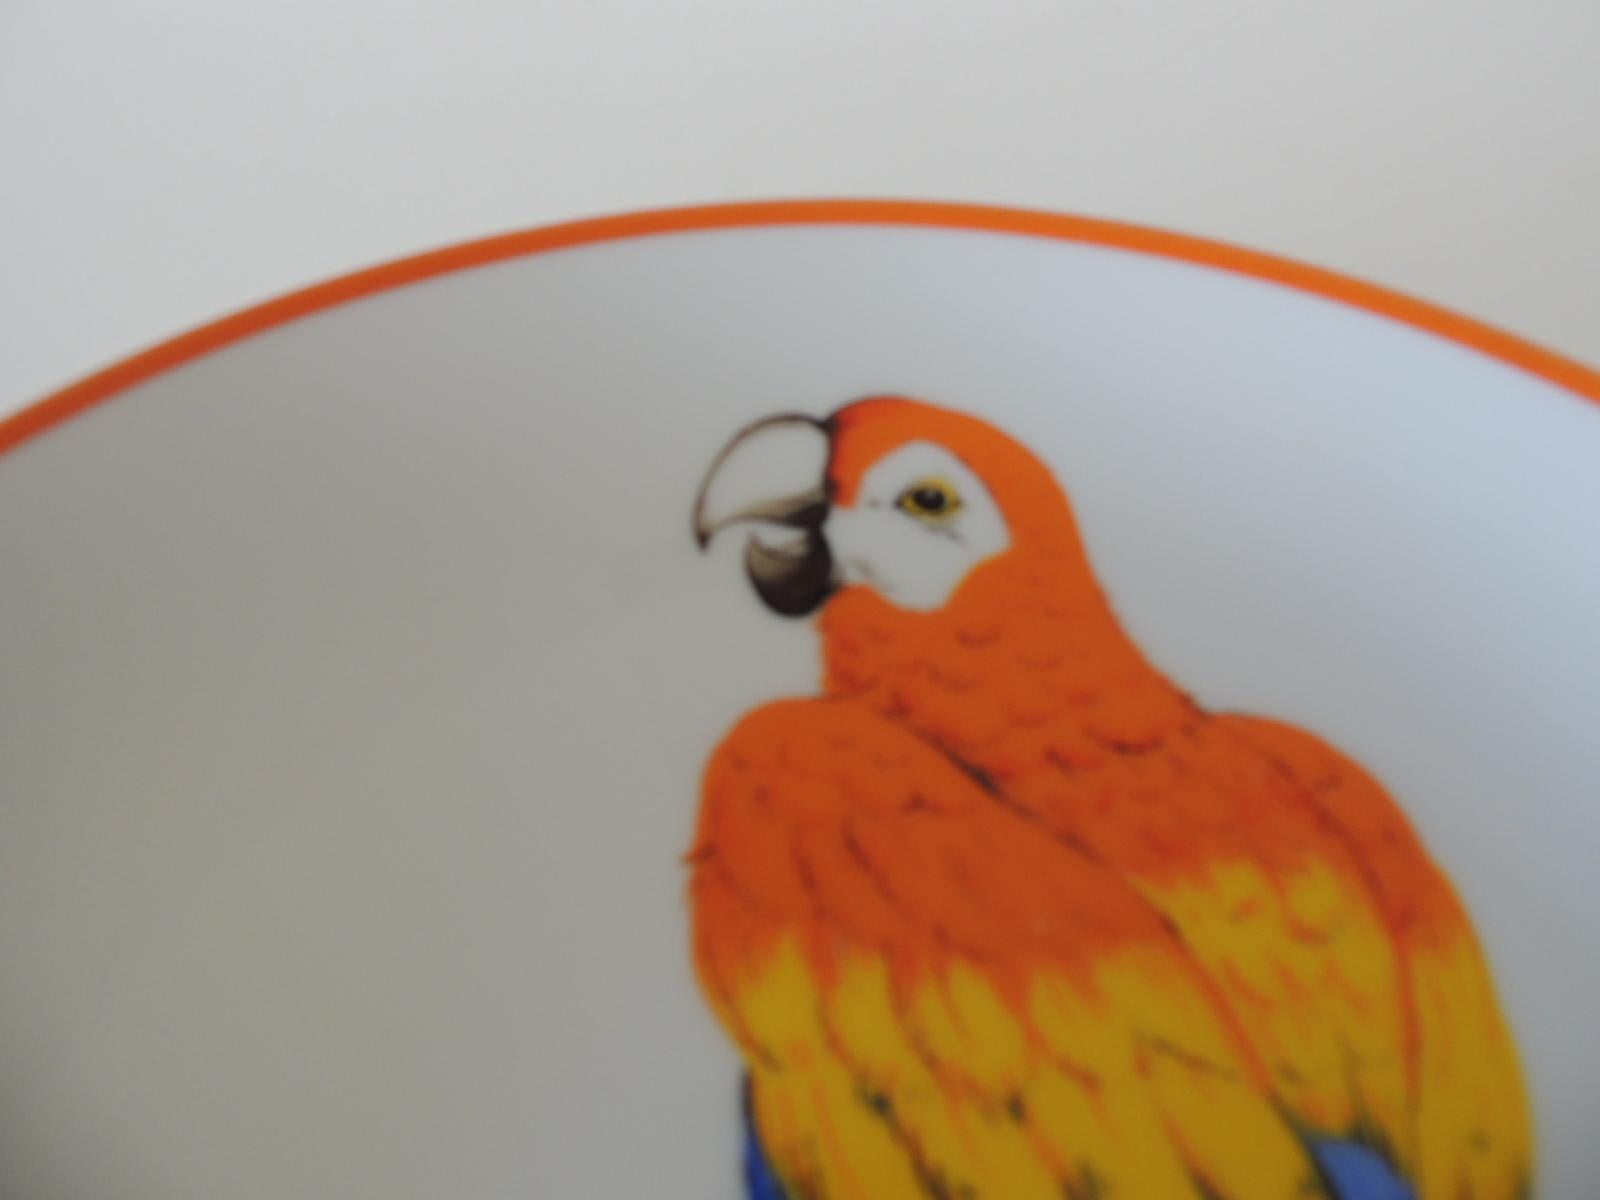 Round orange and blue macaw parrot decorative plate
Macaw on branch in shades of orange, yellow and blue.
Size: 8.5